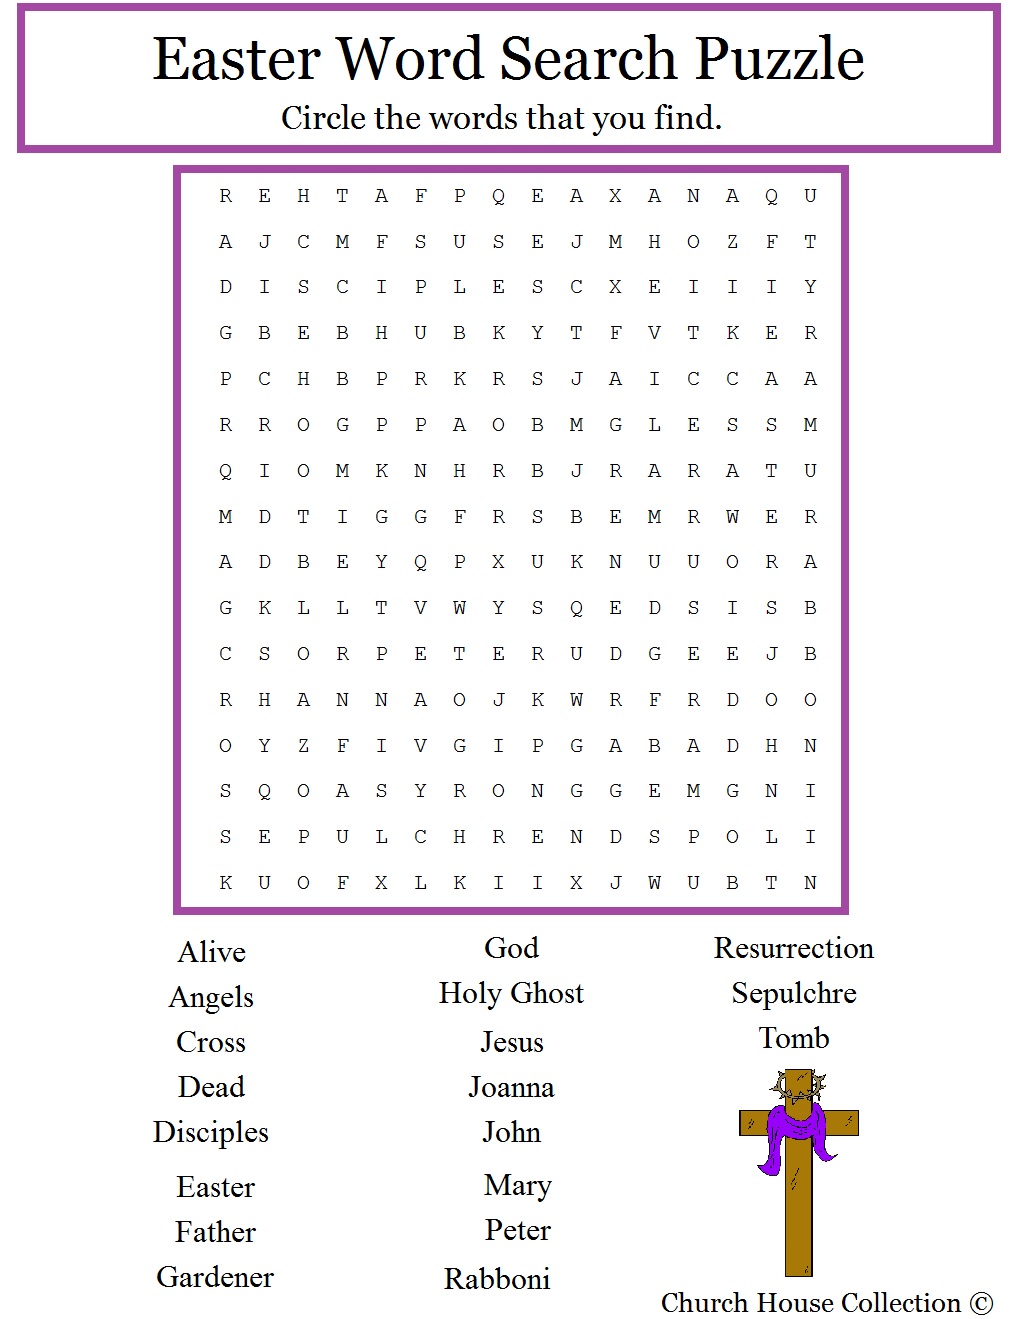 church-house-collection-blog-christian-easter-word-search-for-kids